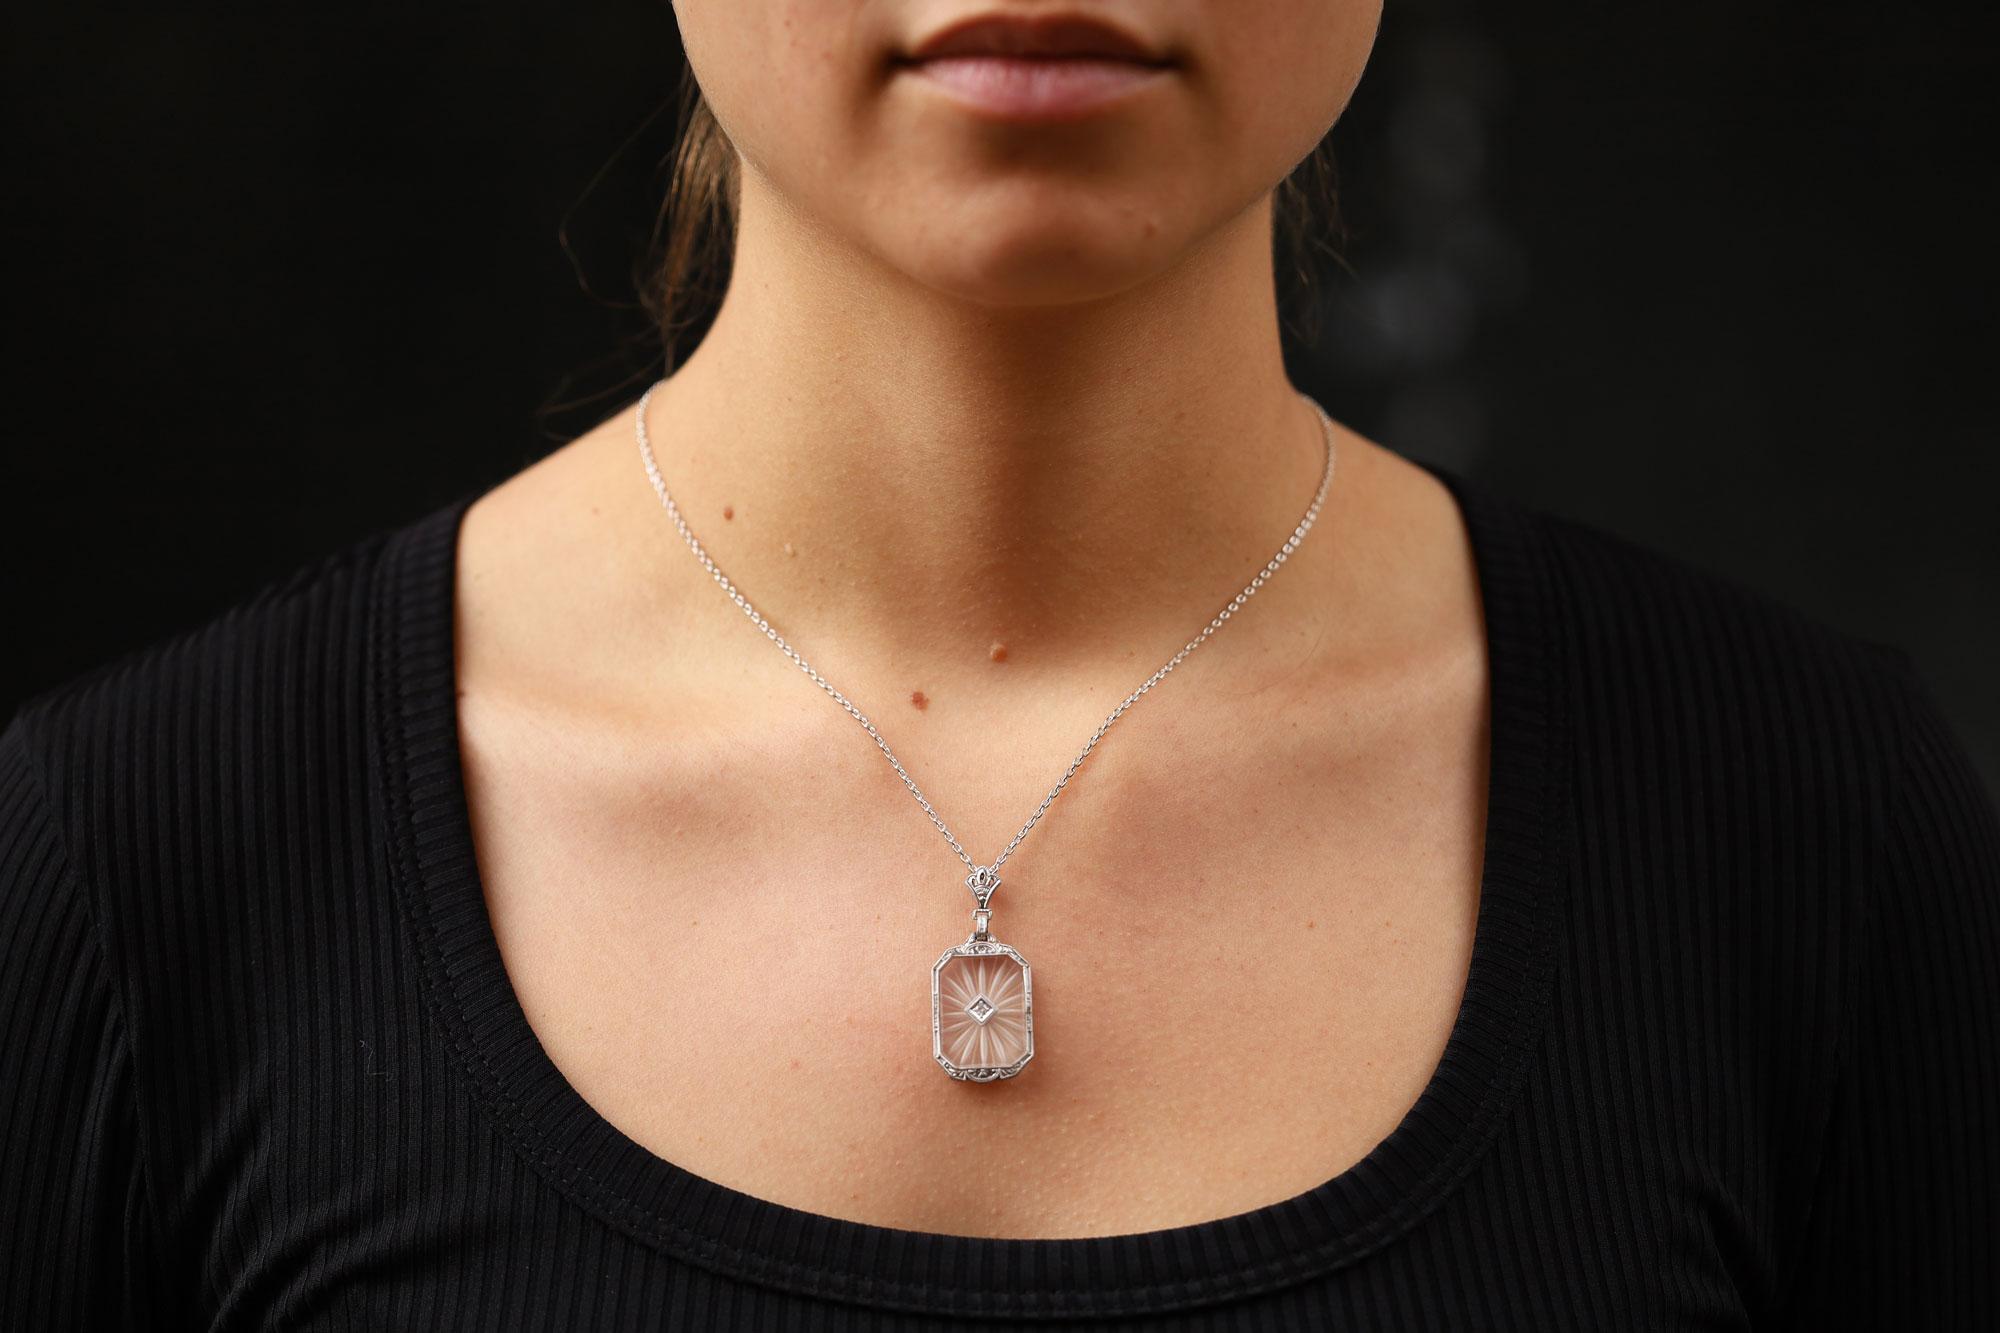 This 1920s antique necklace features beautifully hand carved rock crystal, ever unique and fashionable. With exceptional craftsmanship and intricate, scrolling engraved volute designs, this platinum pendant focuses on a sparkling natural diamond in